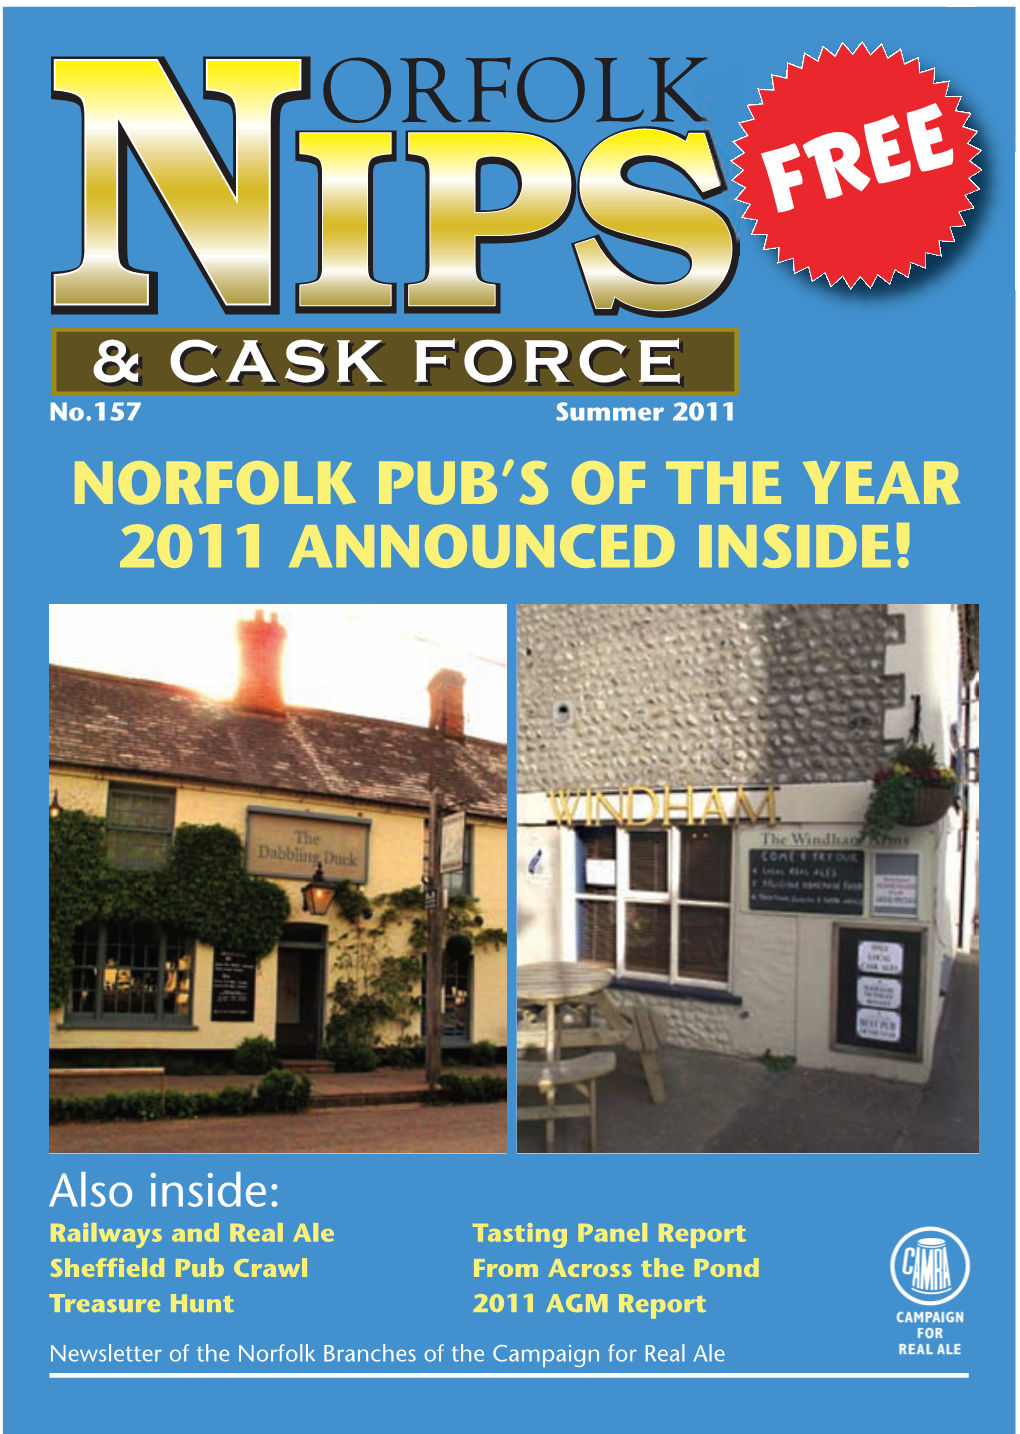 & Cask Force Norfolk Pub's of the Year 2011 Announced